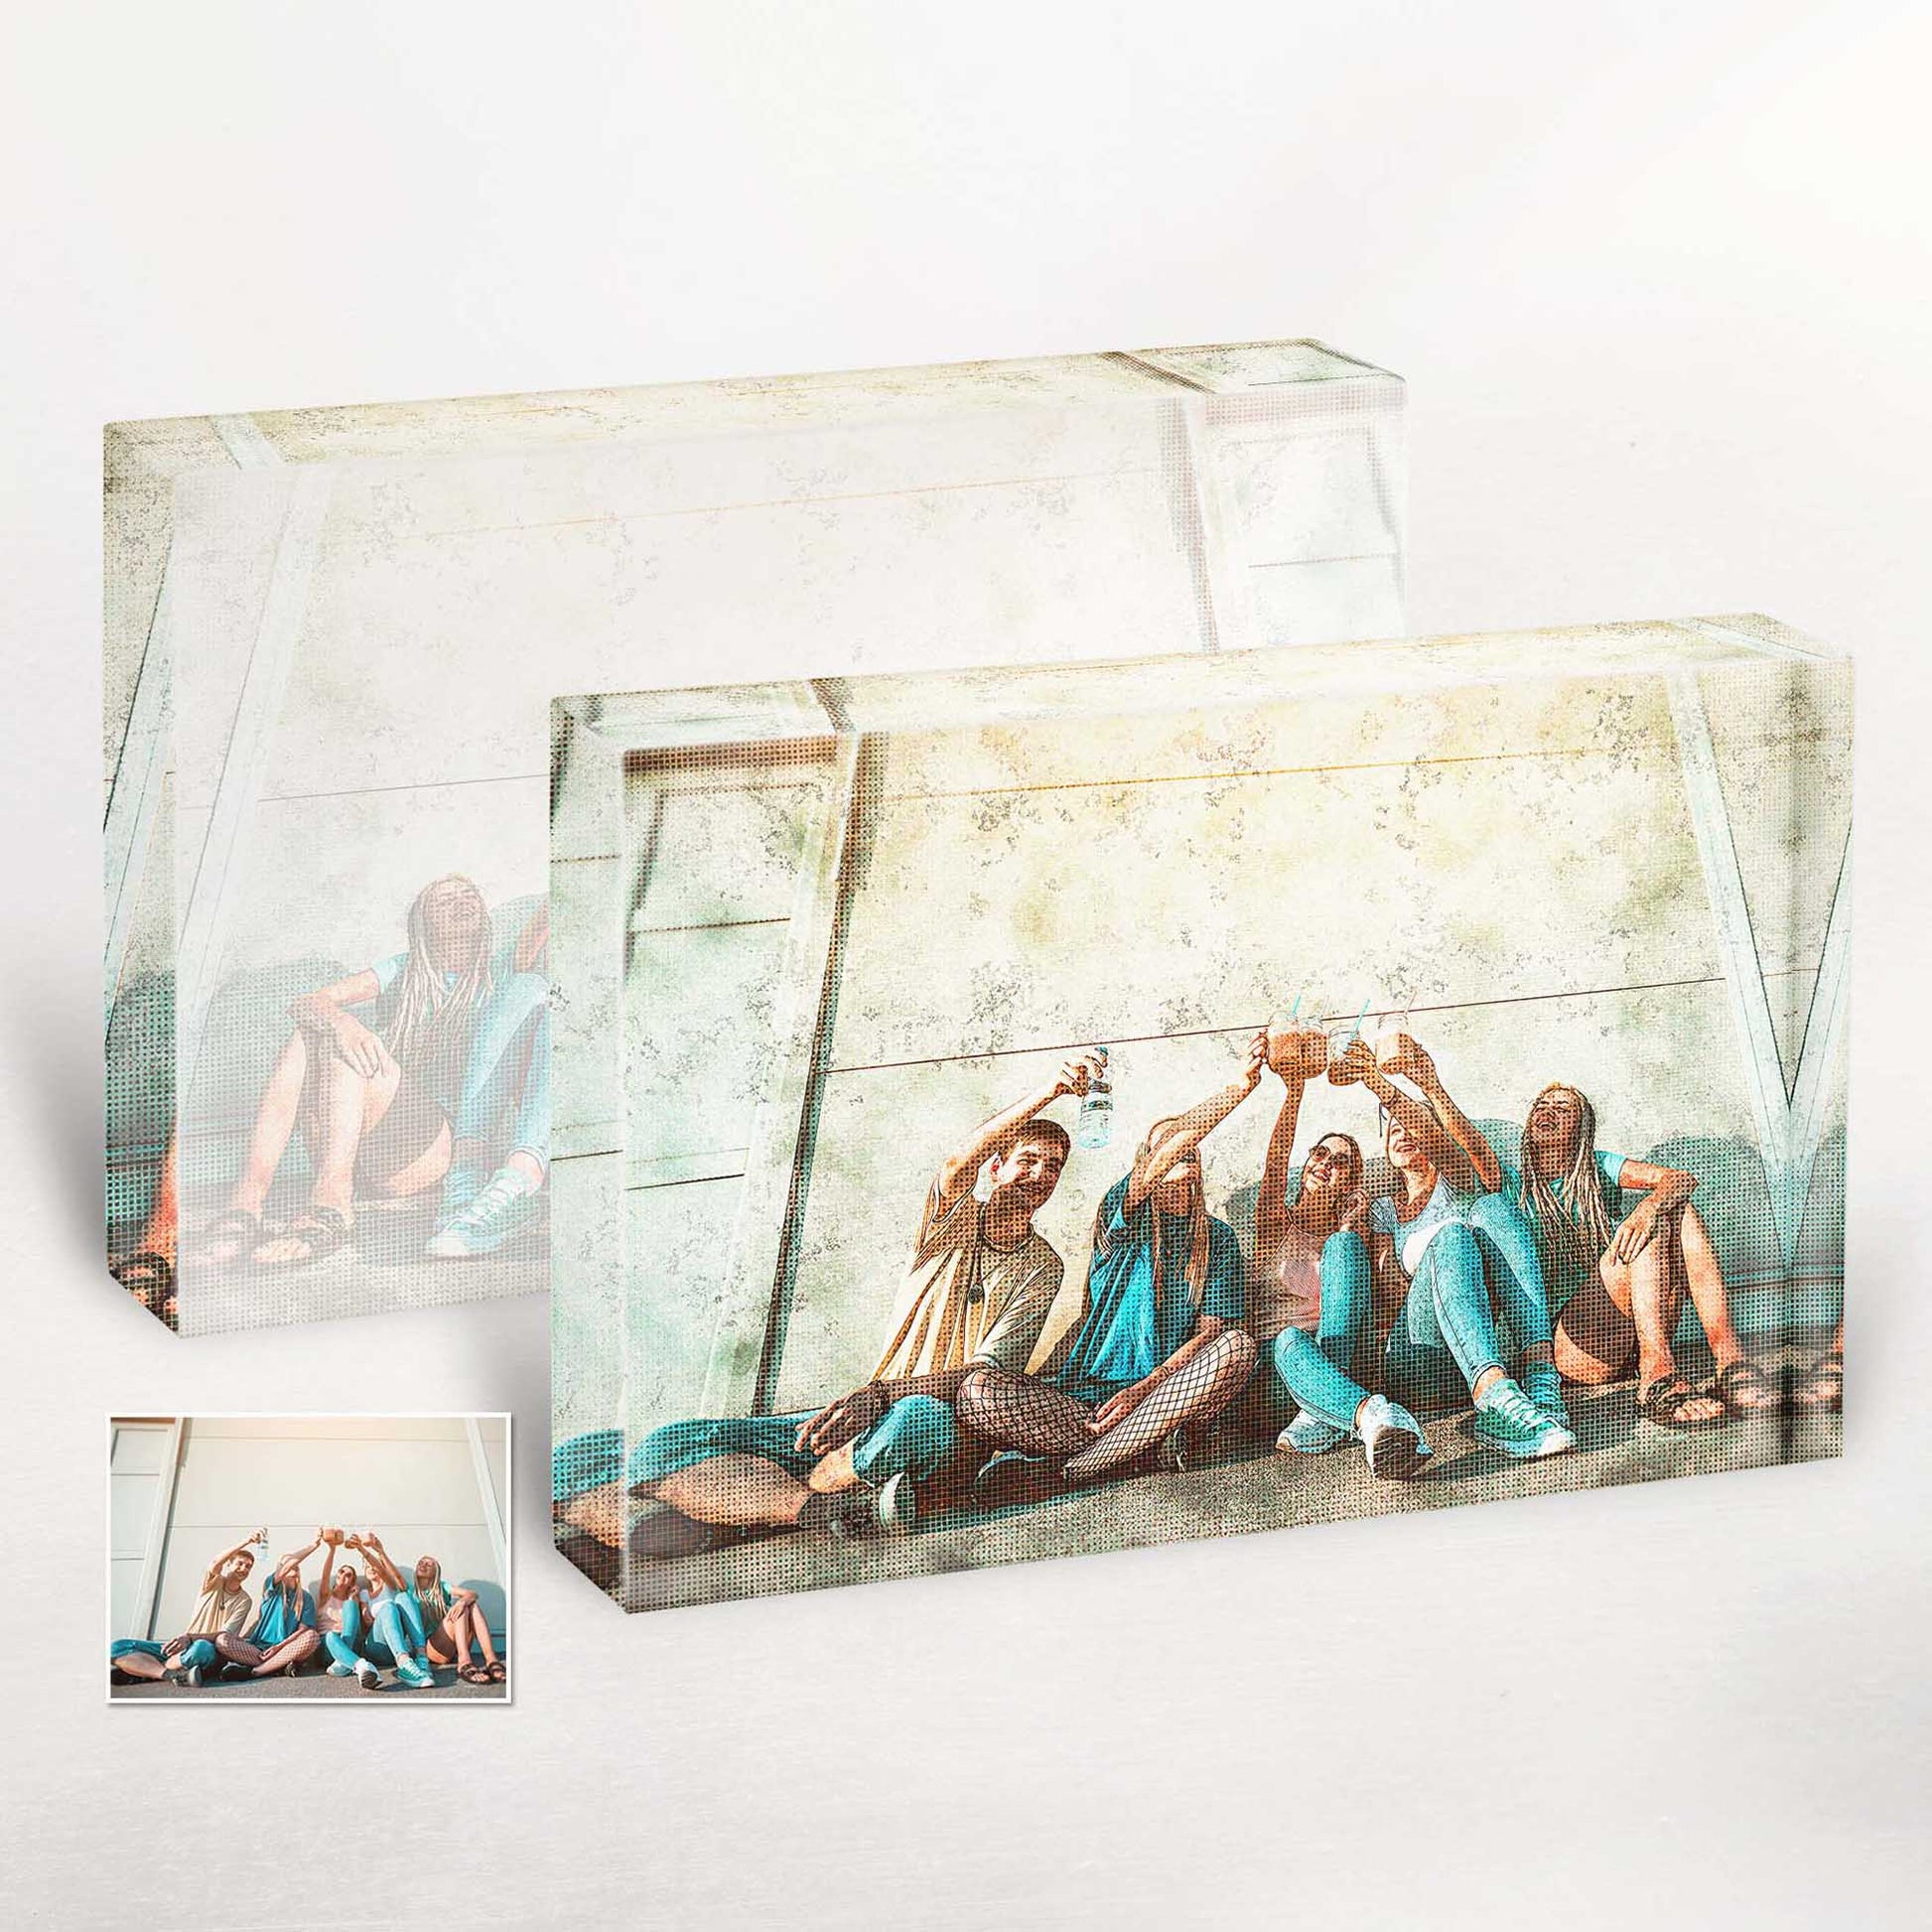 Add a nostalgic touch to your home decor with the Personalised Grunge FX Acrylic Block Photo. Its oldschool charm, enhanced by the halftone design, creates a unique and captivating aesthetic